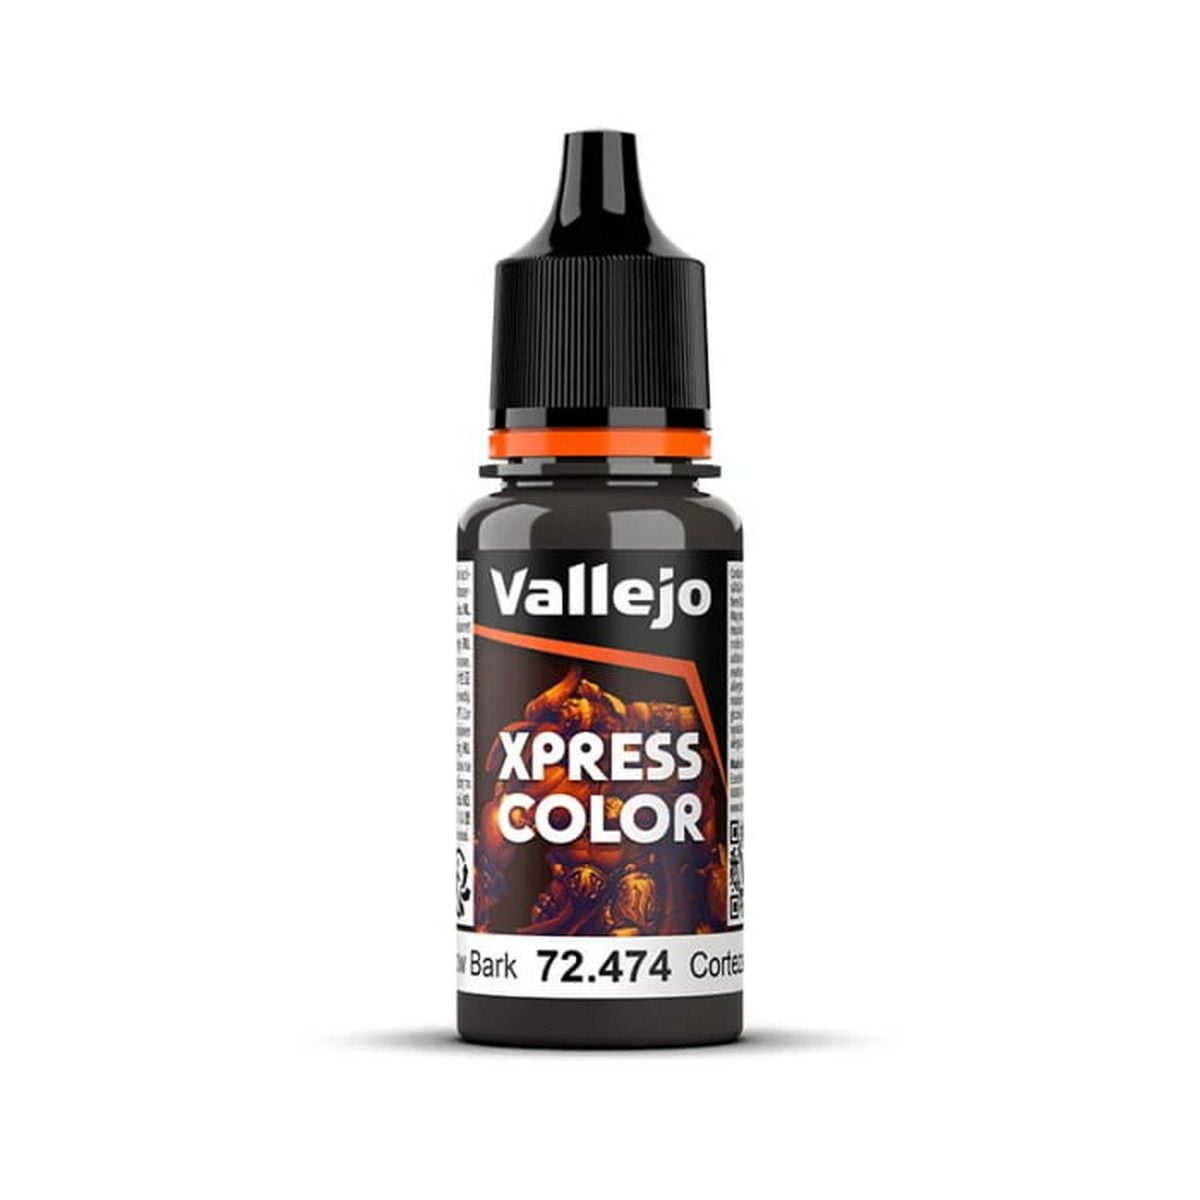 Xpress Color - Willow Bark - 18ml